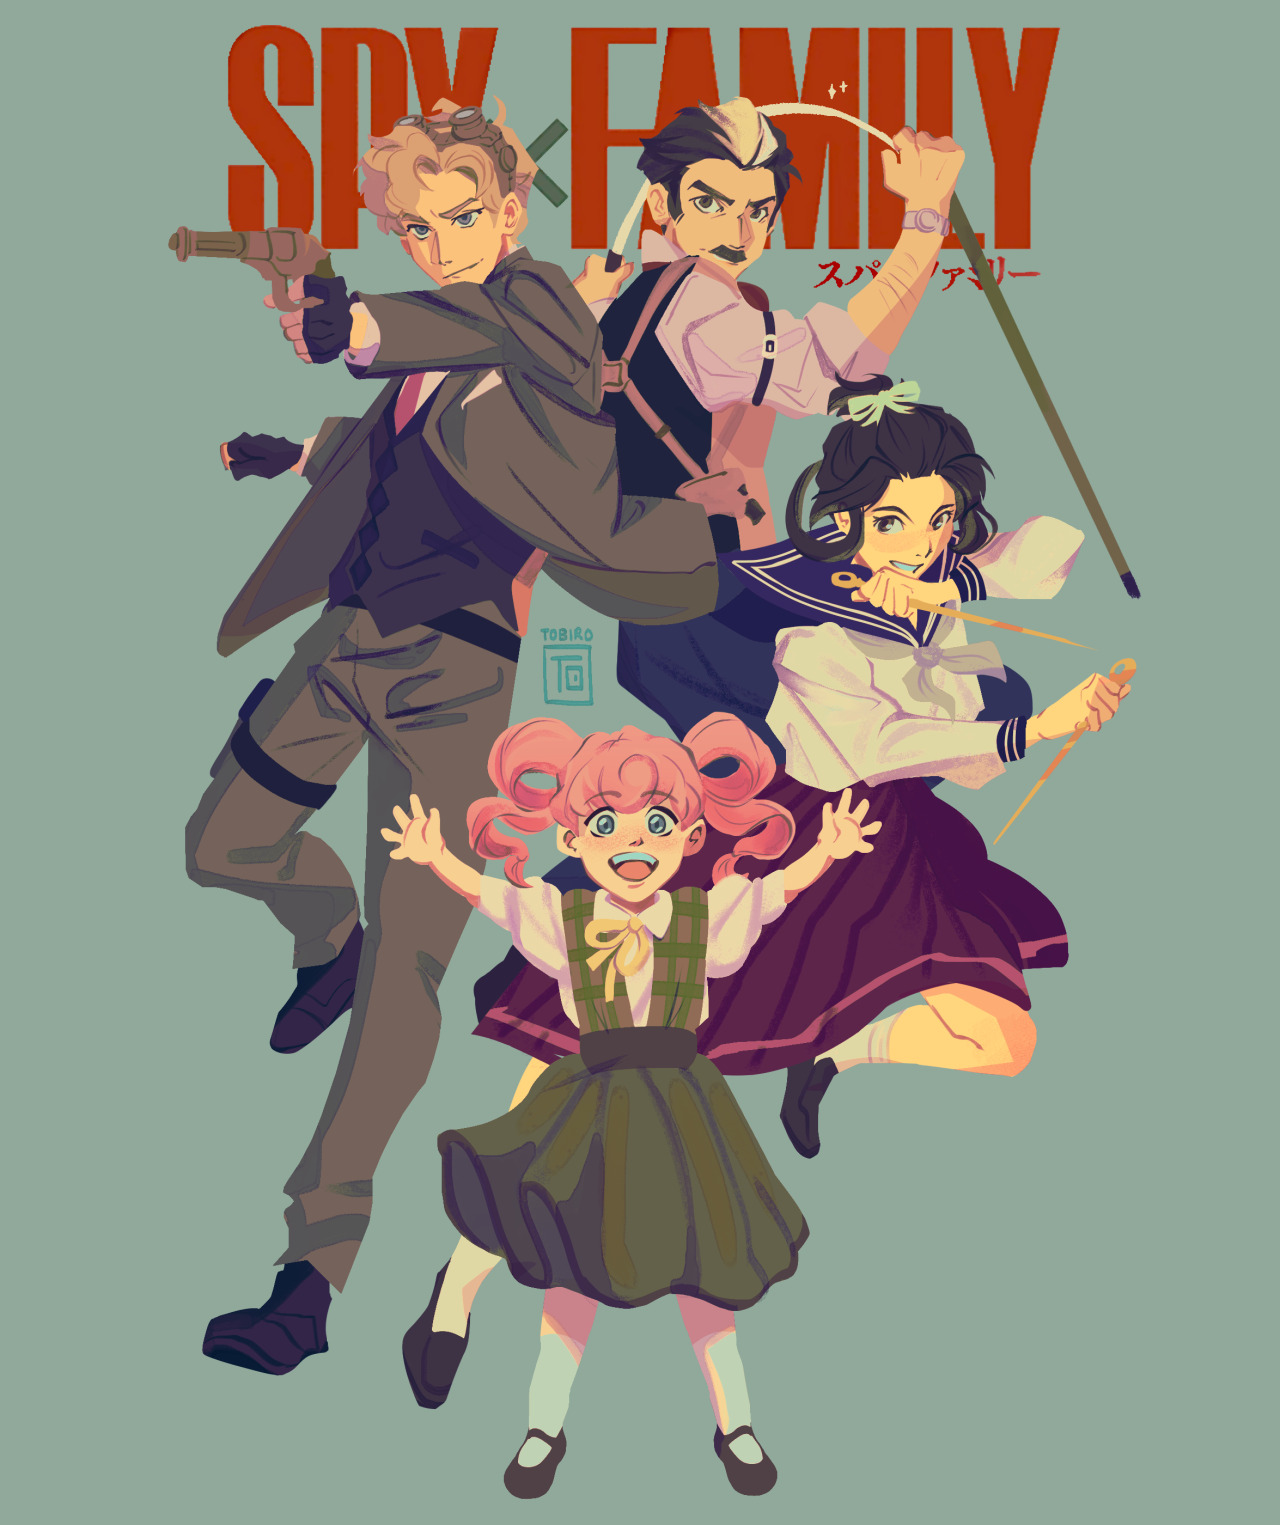 sometimes a family is a spy, two assassins, and a pink haired daughter  #the great ace attorney  #come on guys the parallels are ridiculous #tgaa #spy x family #dgs #dai gyakuten saiban #ace attorney#herlock sholmes#mikotoba yuujin#susato mikotoba#iris wilson#homumiko#my art